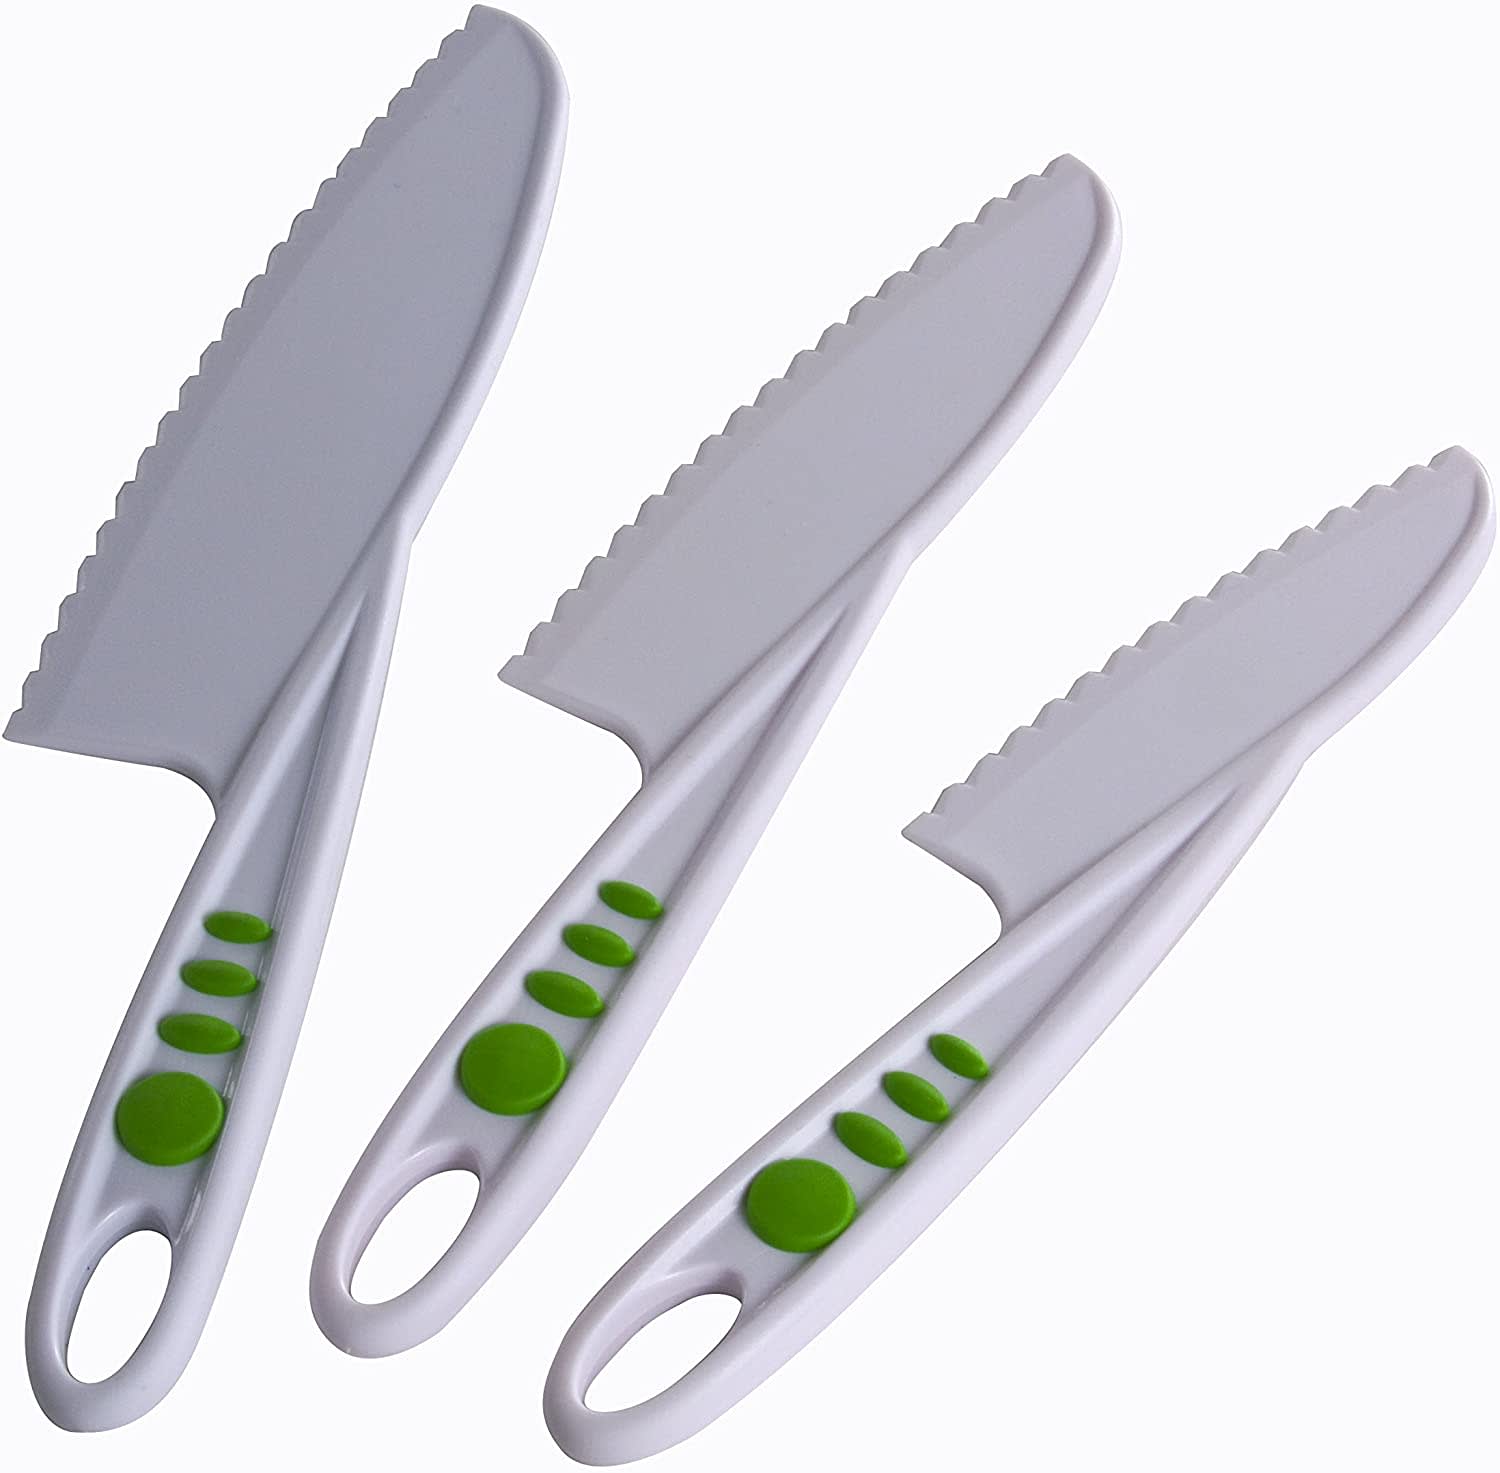 We Review Australia's Most Popular Child Safe Knife - the